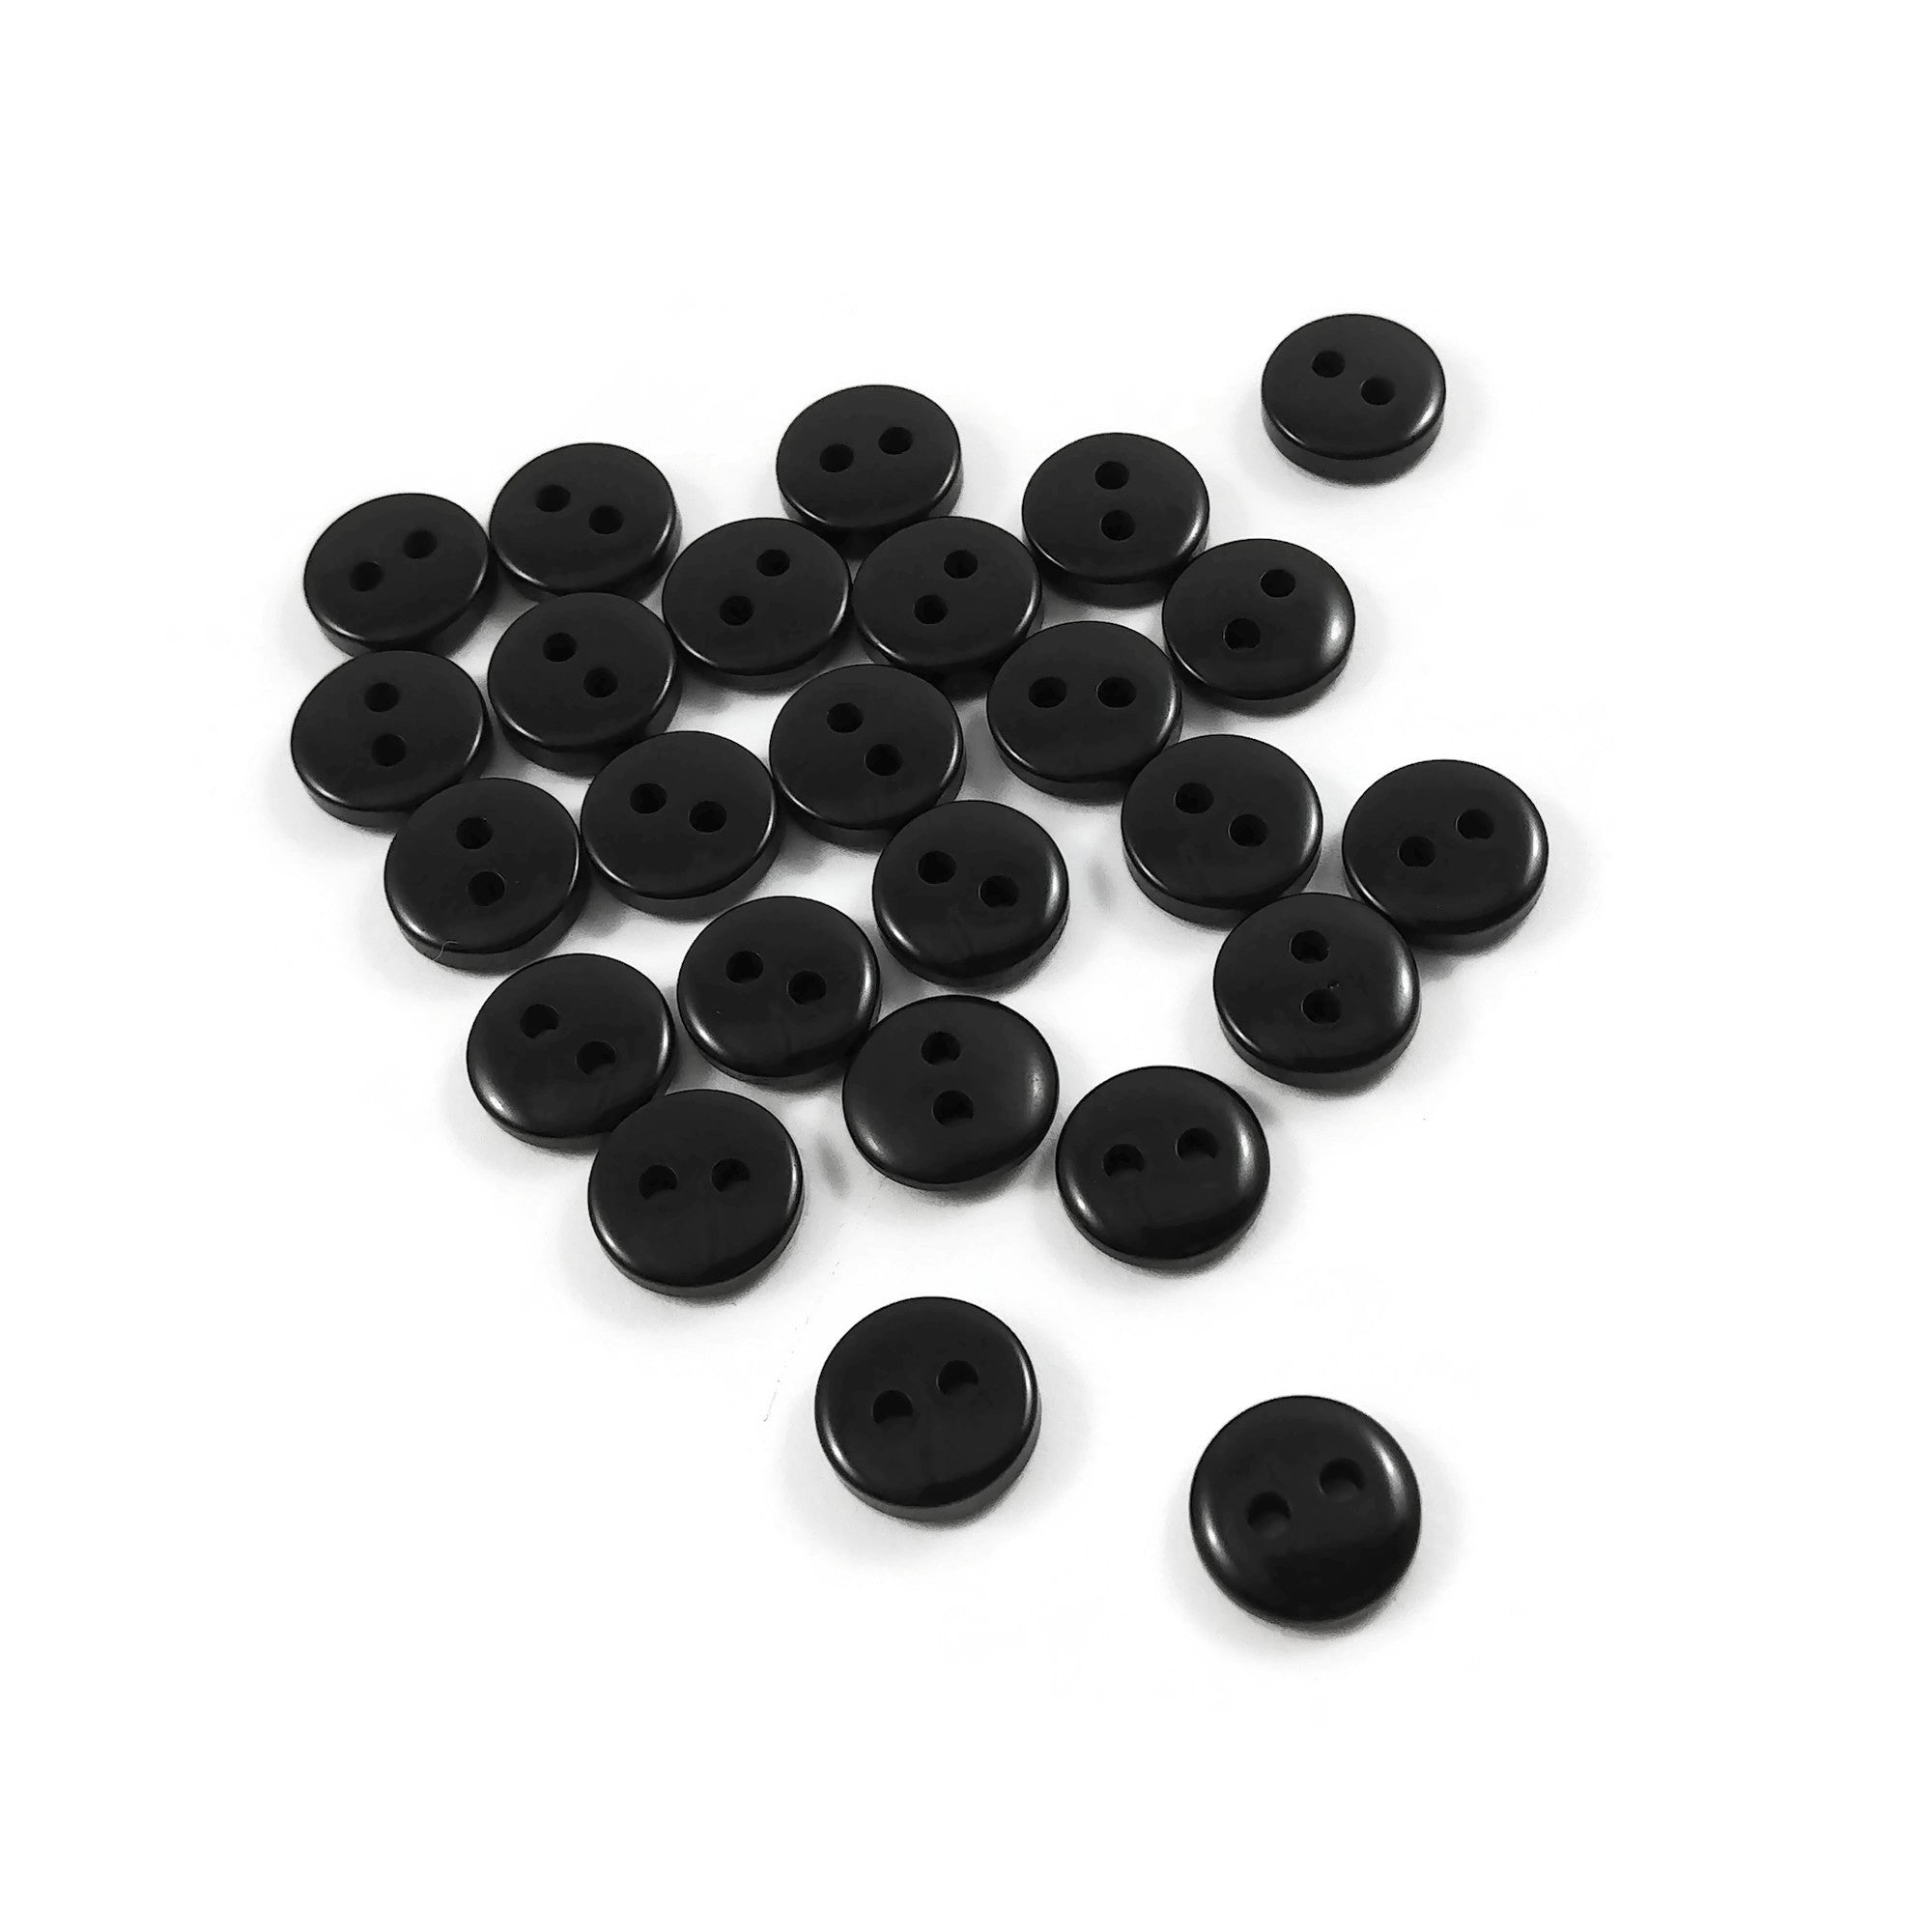 15MM Matte Black Buttons 48 Plastic 5/8 24L 2-hole Sew on Sewing